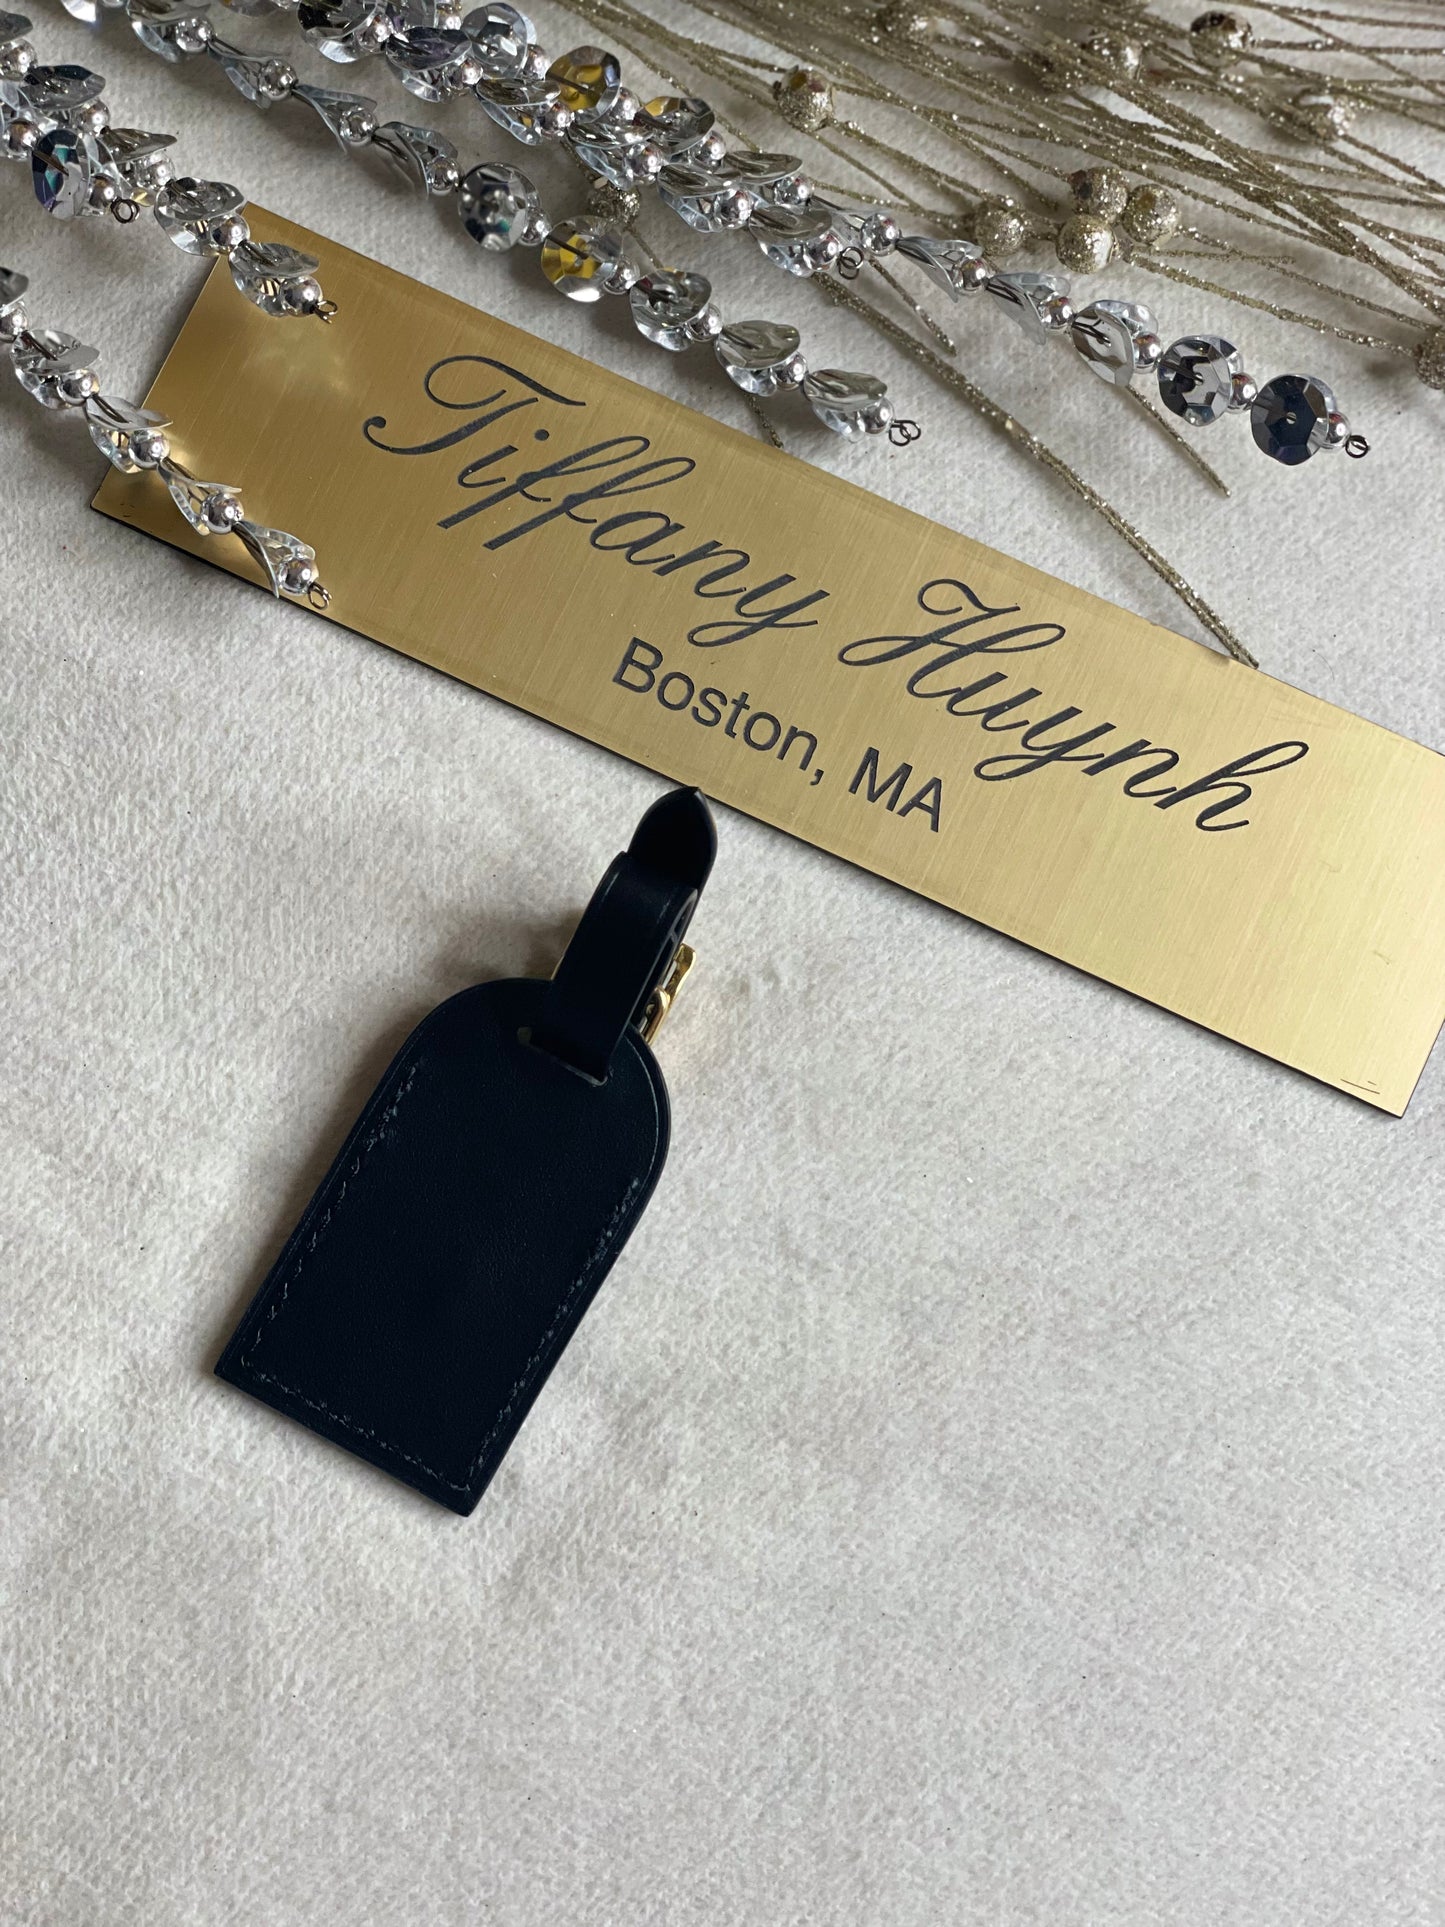 Authentic Louis Vuitton Odeon PM Luggage Tag